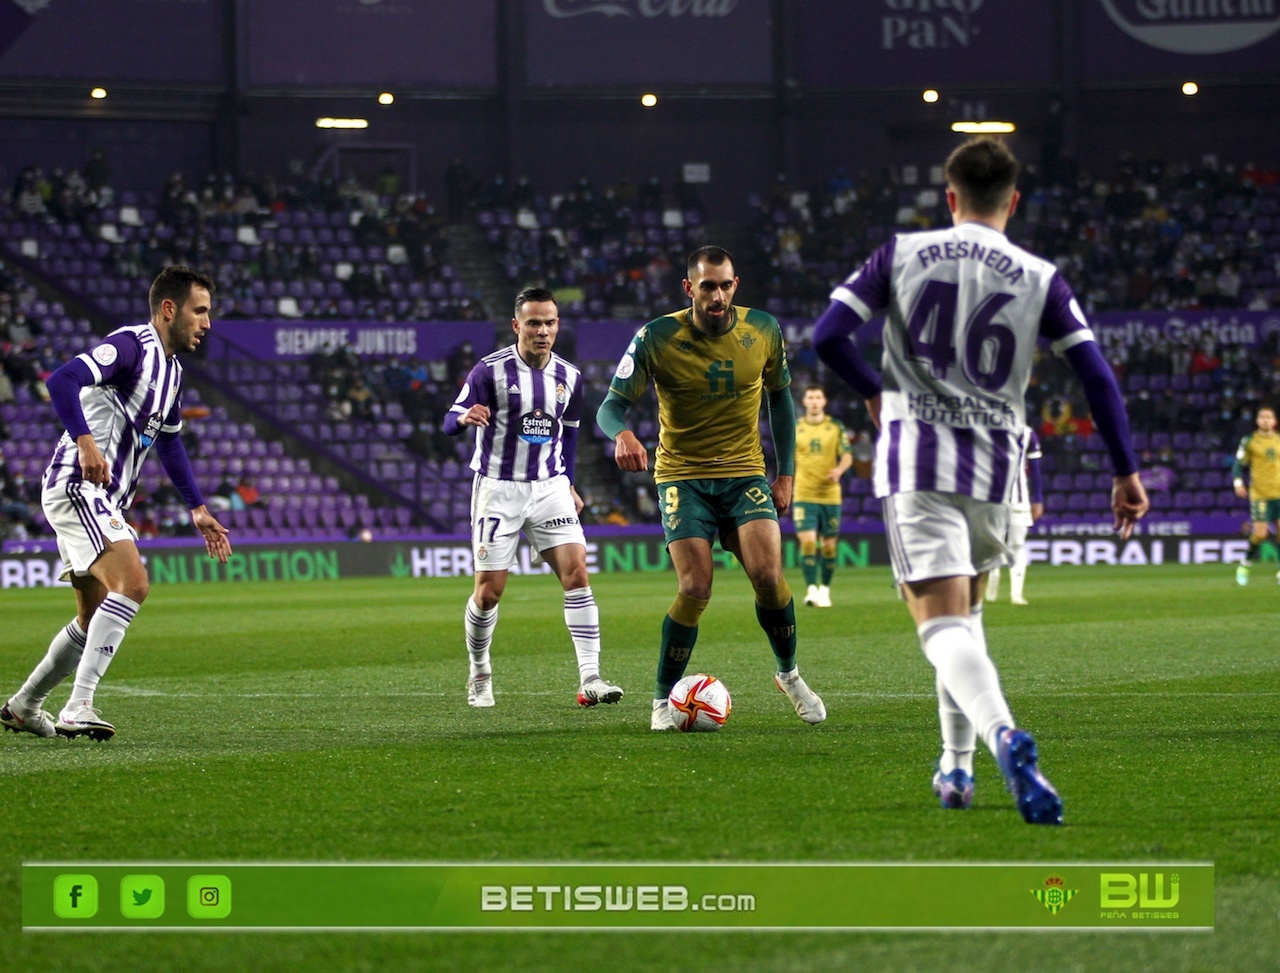 1-16-Real-Valladolid-vs-Real-Betis416